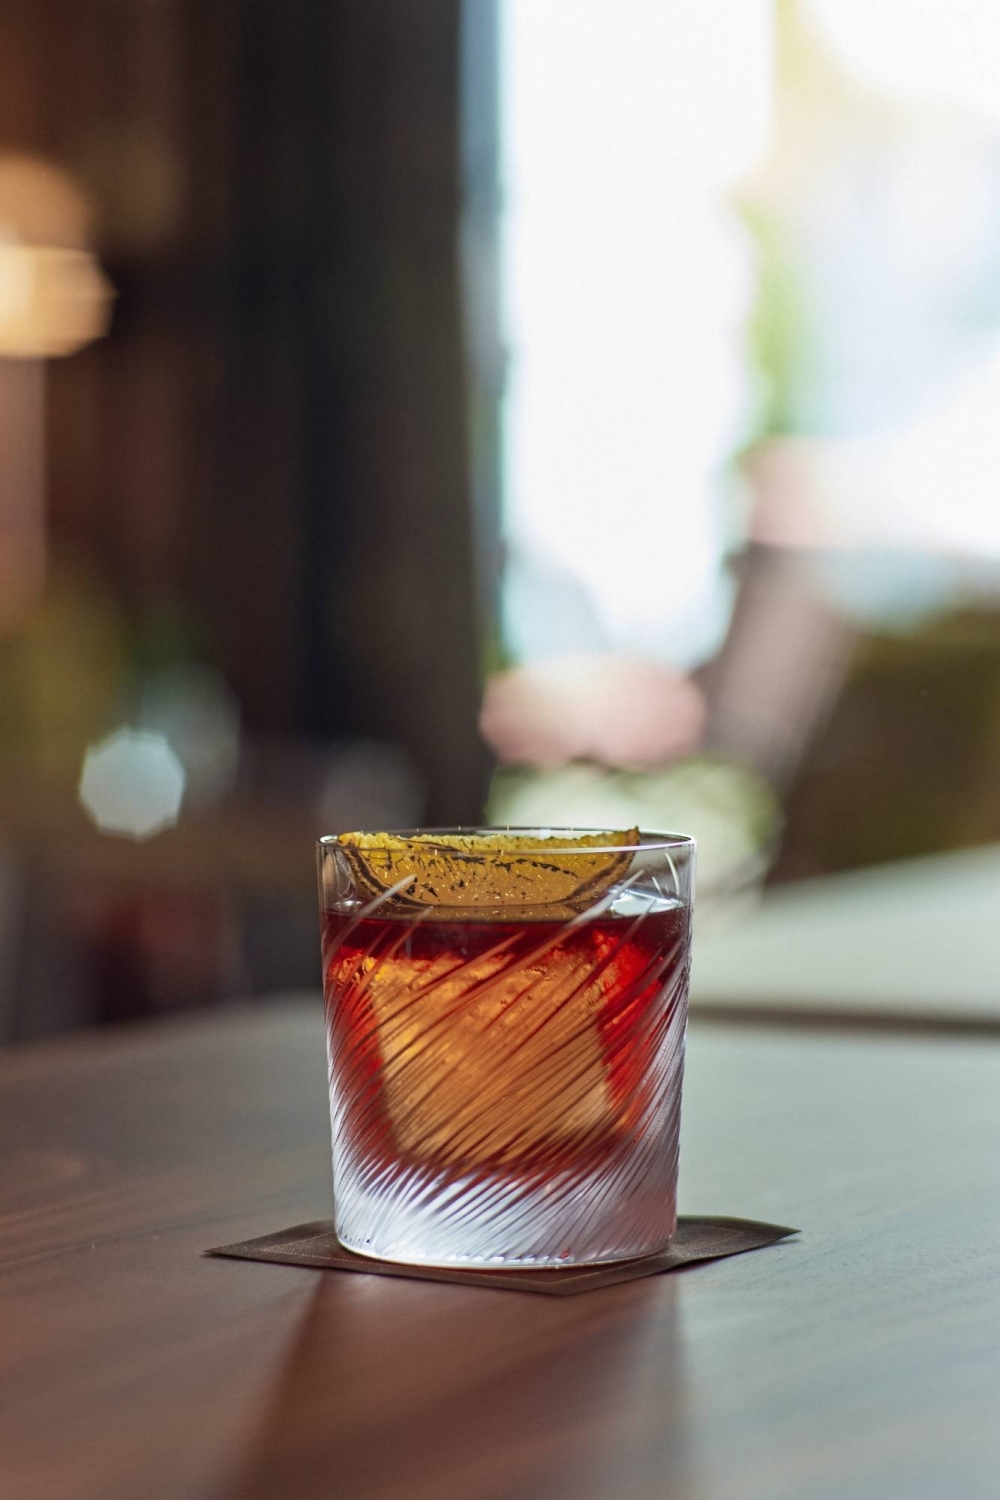 The Bulgari Bar's Roasted Negroni is a swirl of Tanqueray No. 10 gin infused with 'genmaicha' (roasted green tea), Campari and Mancino Chinato vermouth.